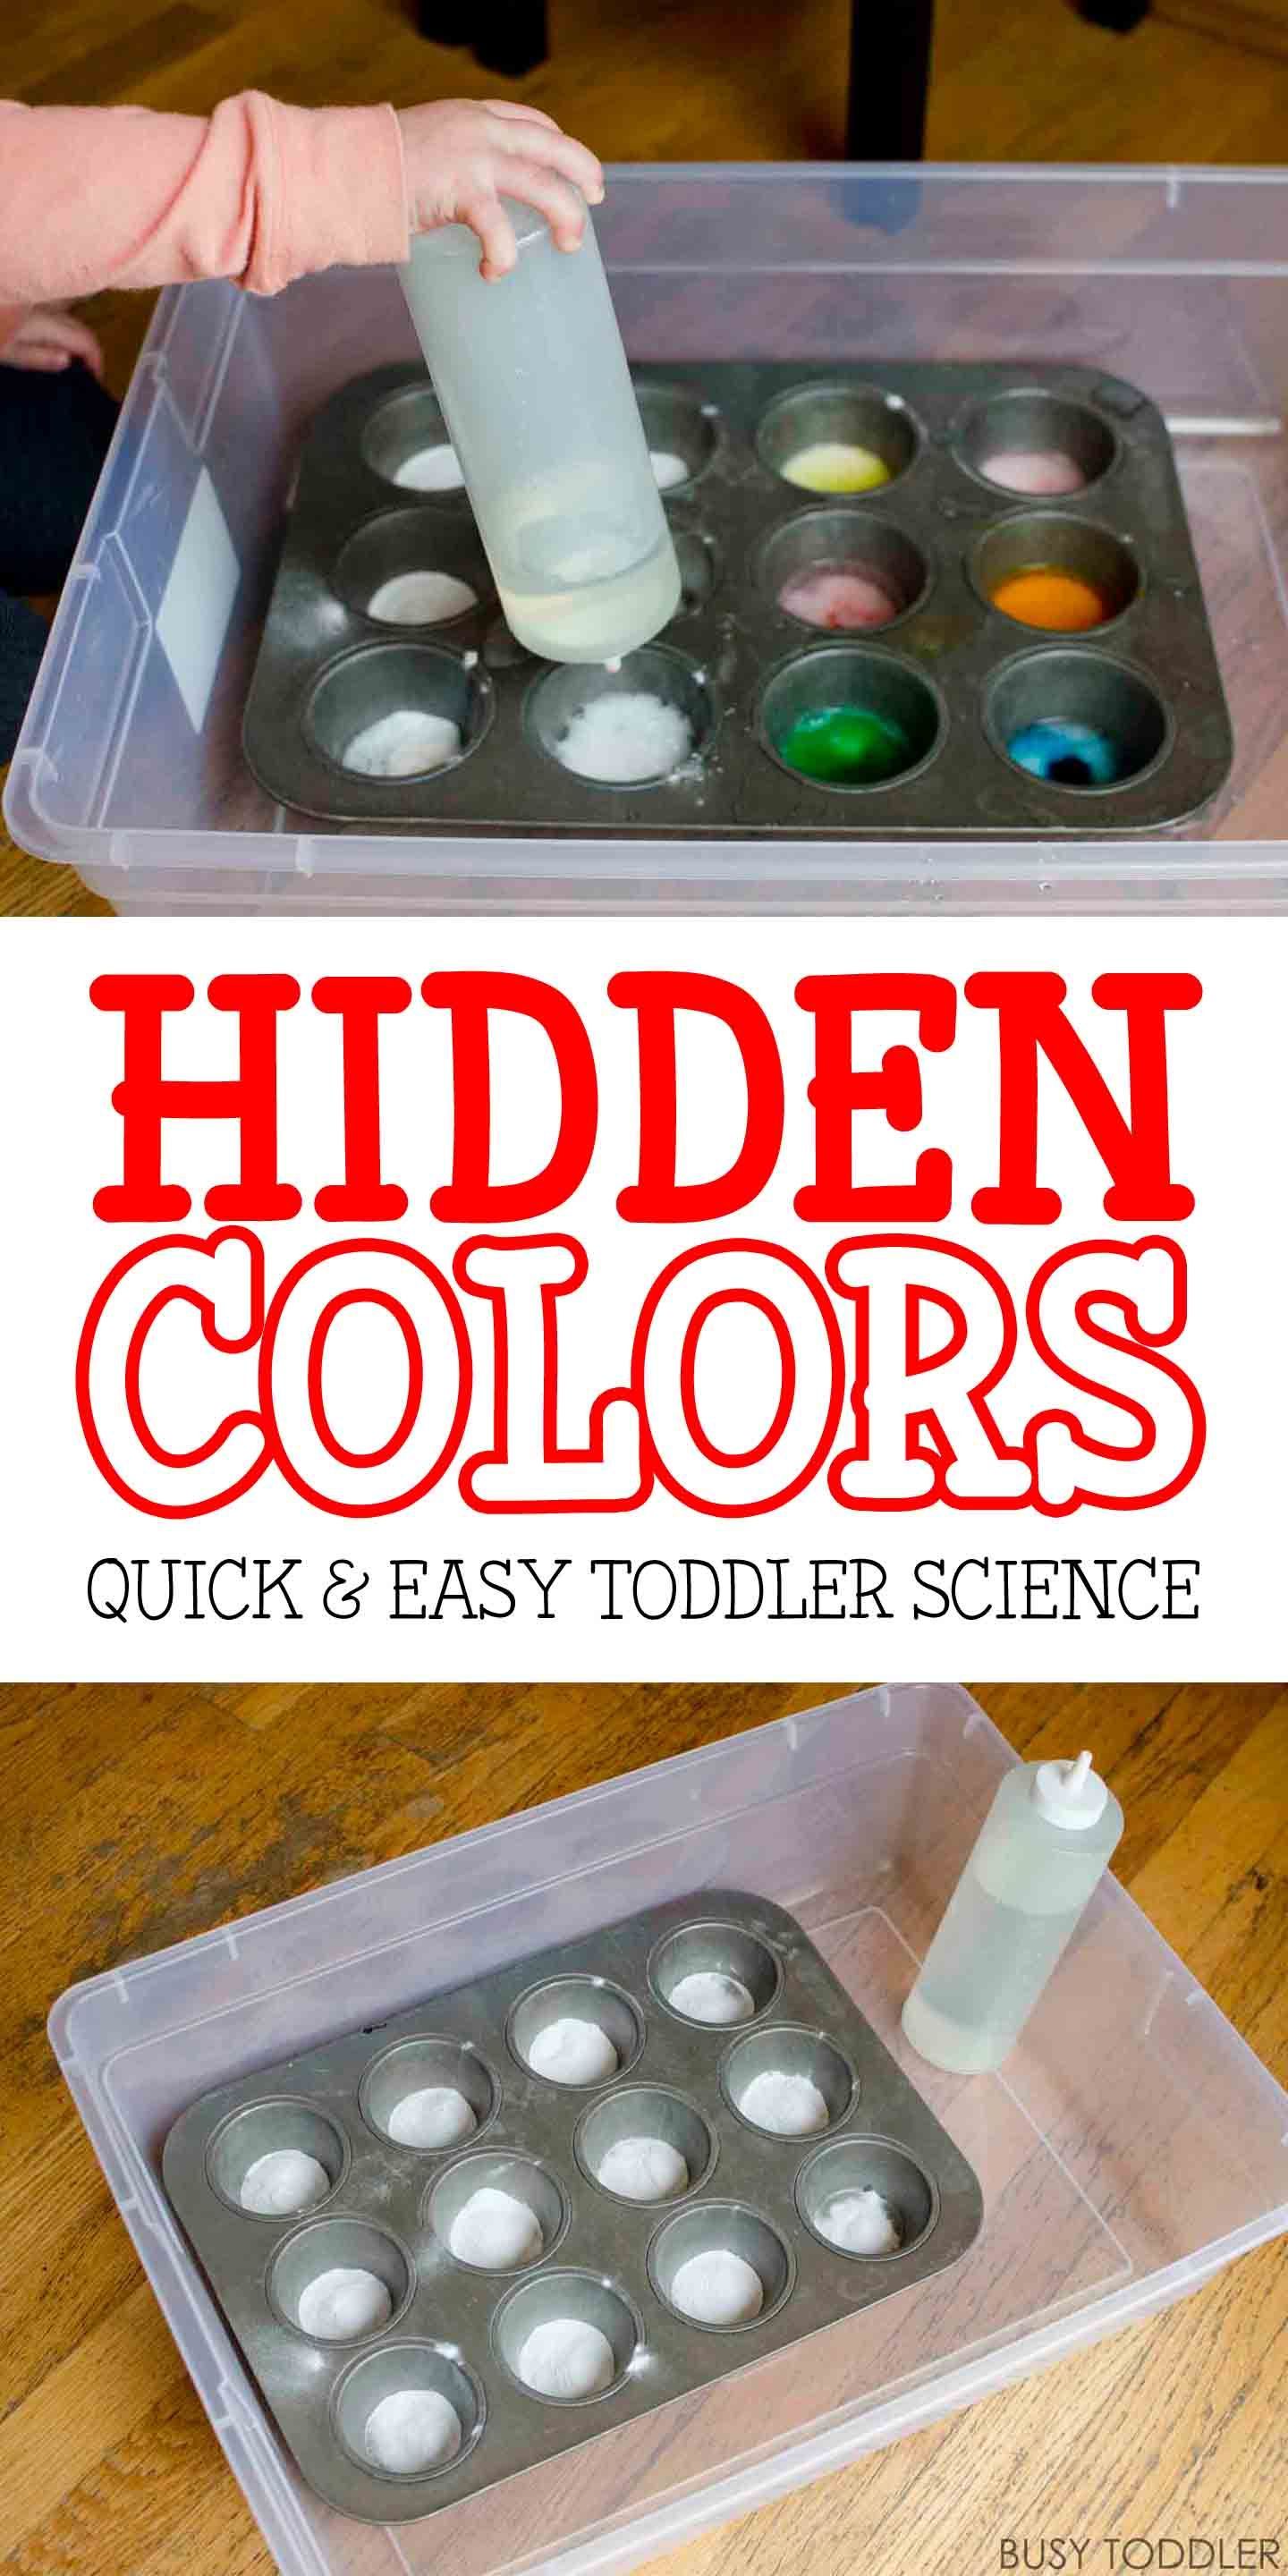 Hidden Colors – Toddler Science Experiment: Check out this cool twist on an old classic. Toddlers will love this fun indoor